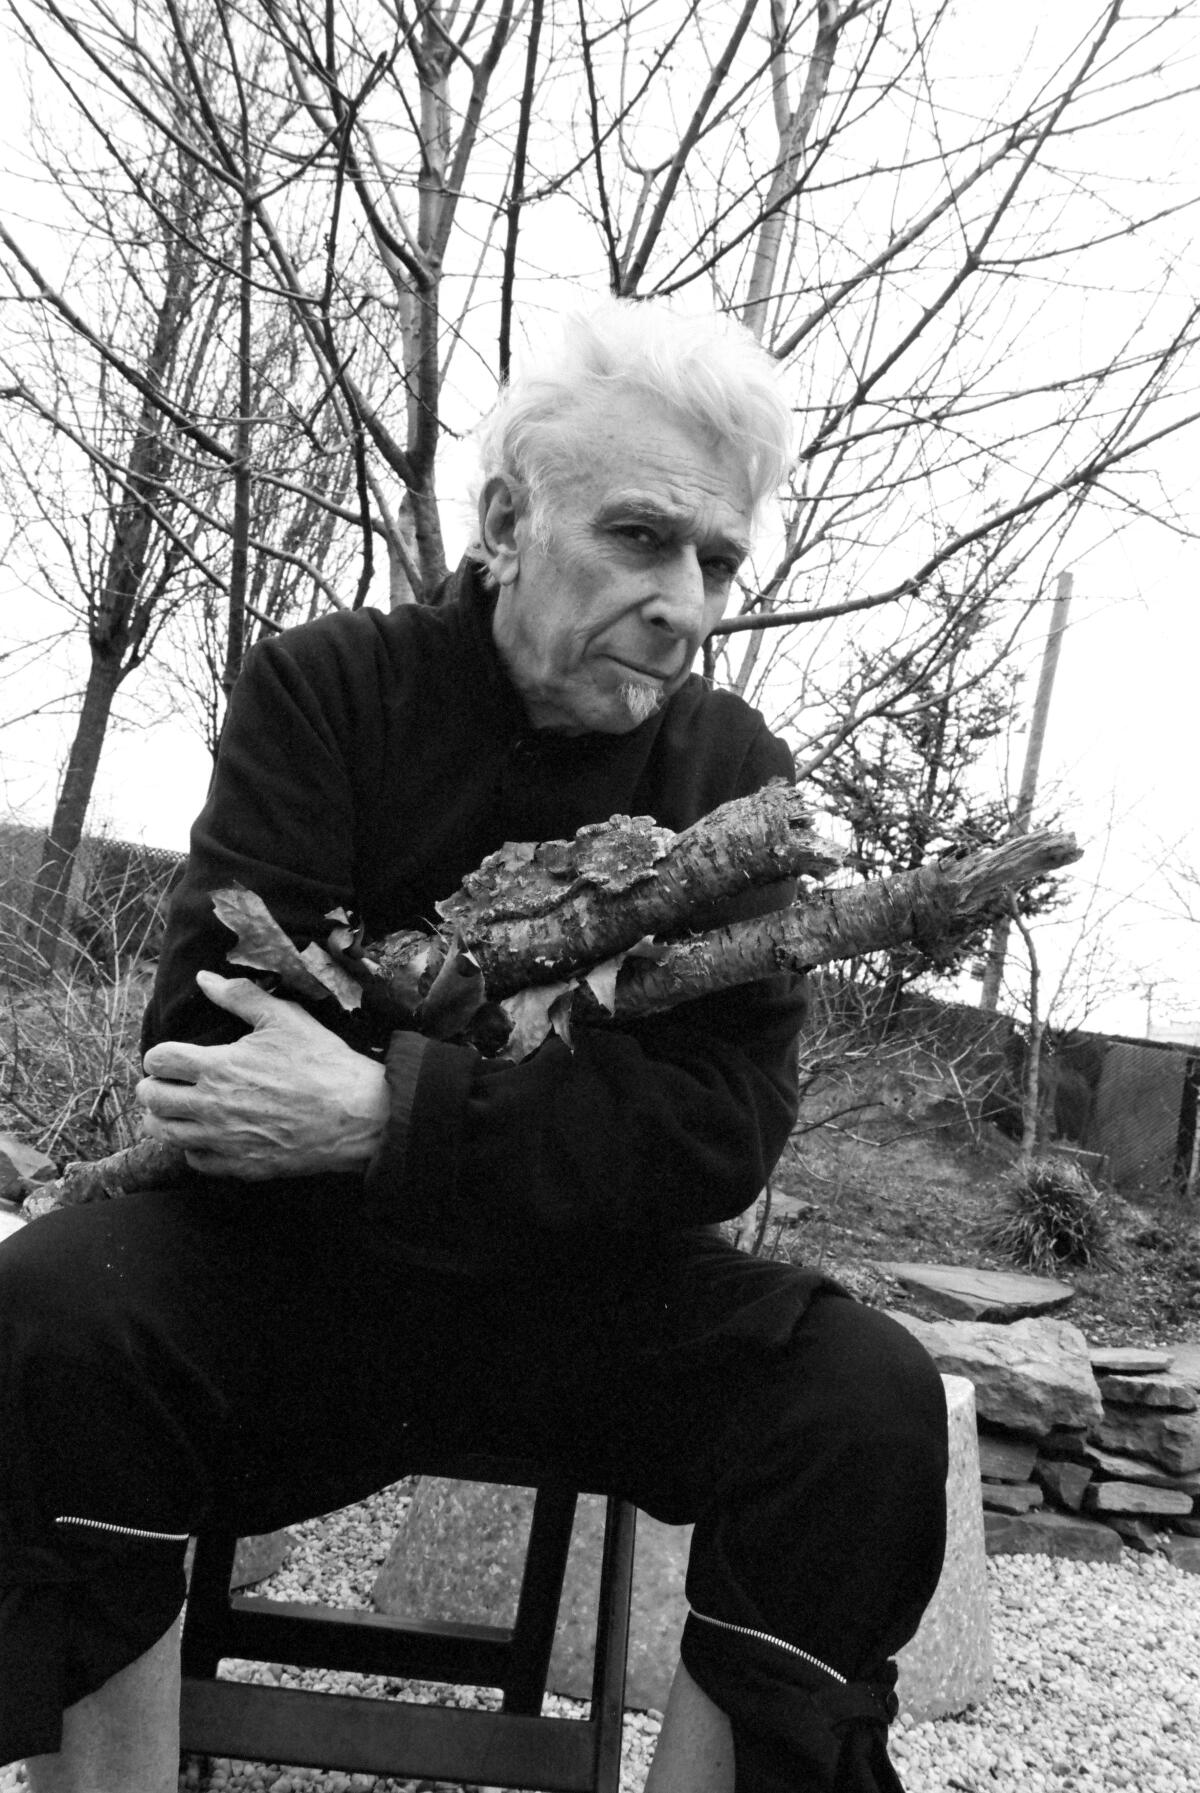 An older man sits outside holding firewood